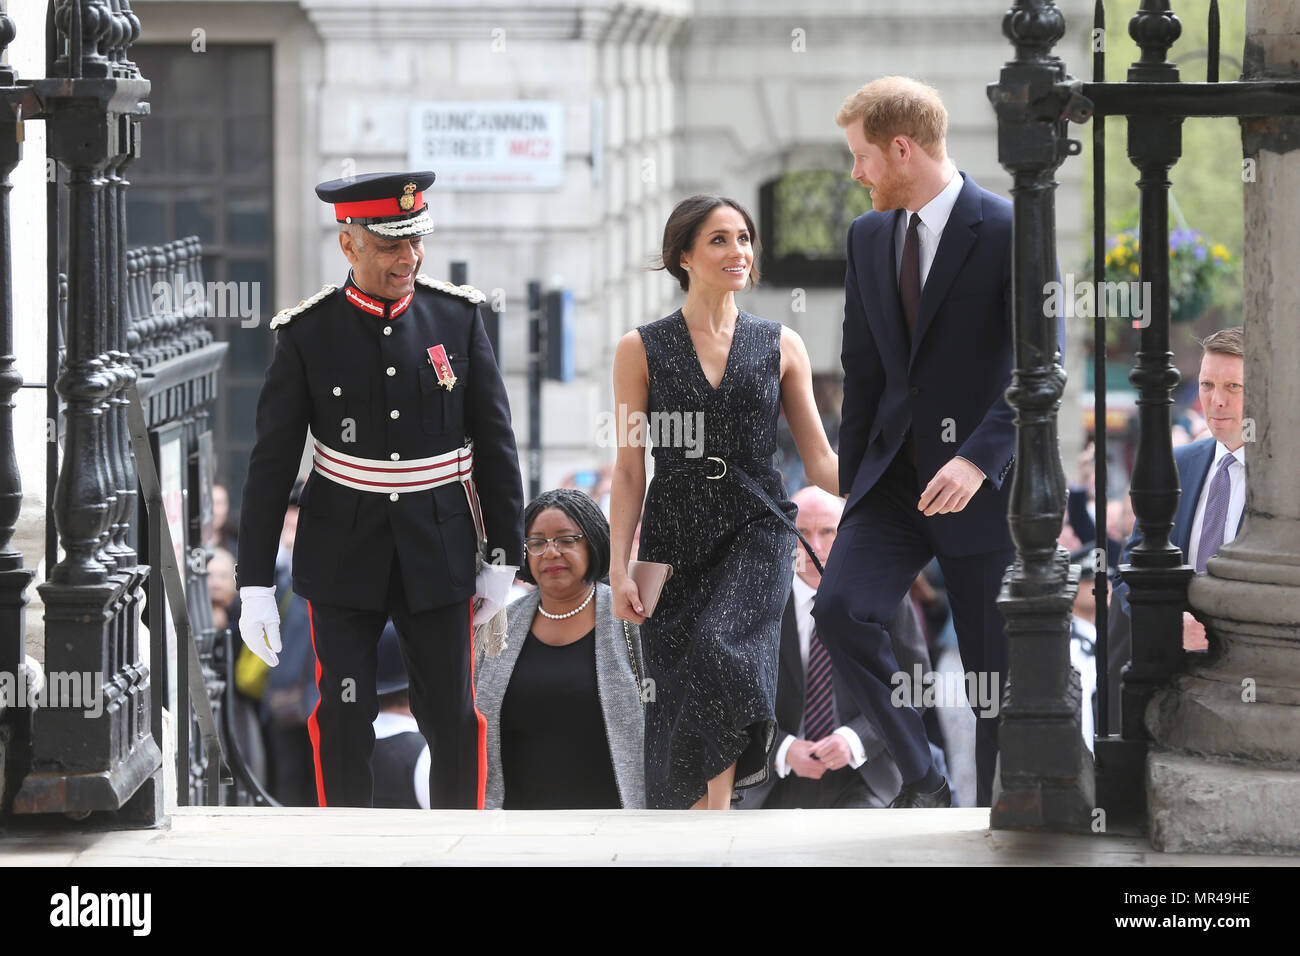 Memorial service to celebrate the life and legacy of Stephen Lawrence, at St Martin-in-the-Fields, Trafalgar Square, London.  Featuring: Prince Harry, Meghan Markle, Kenneth Olisa Where: London, United Kingdom When: 23 Apr 2018 Credit: WENN.com Stock Photo